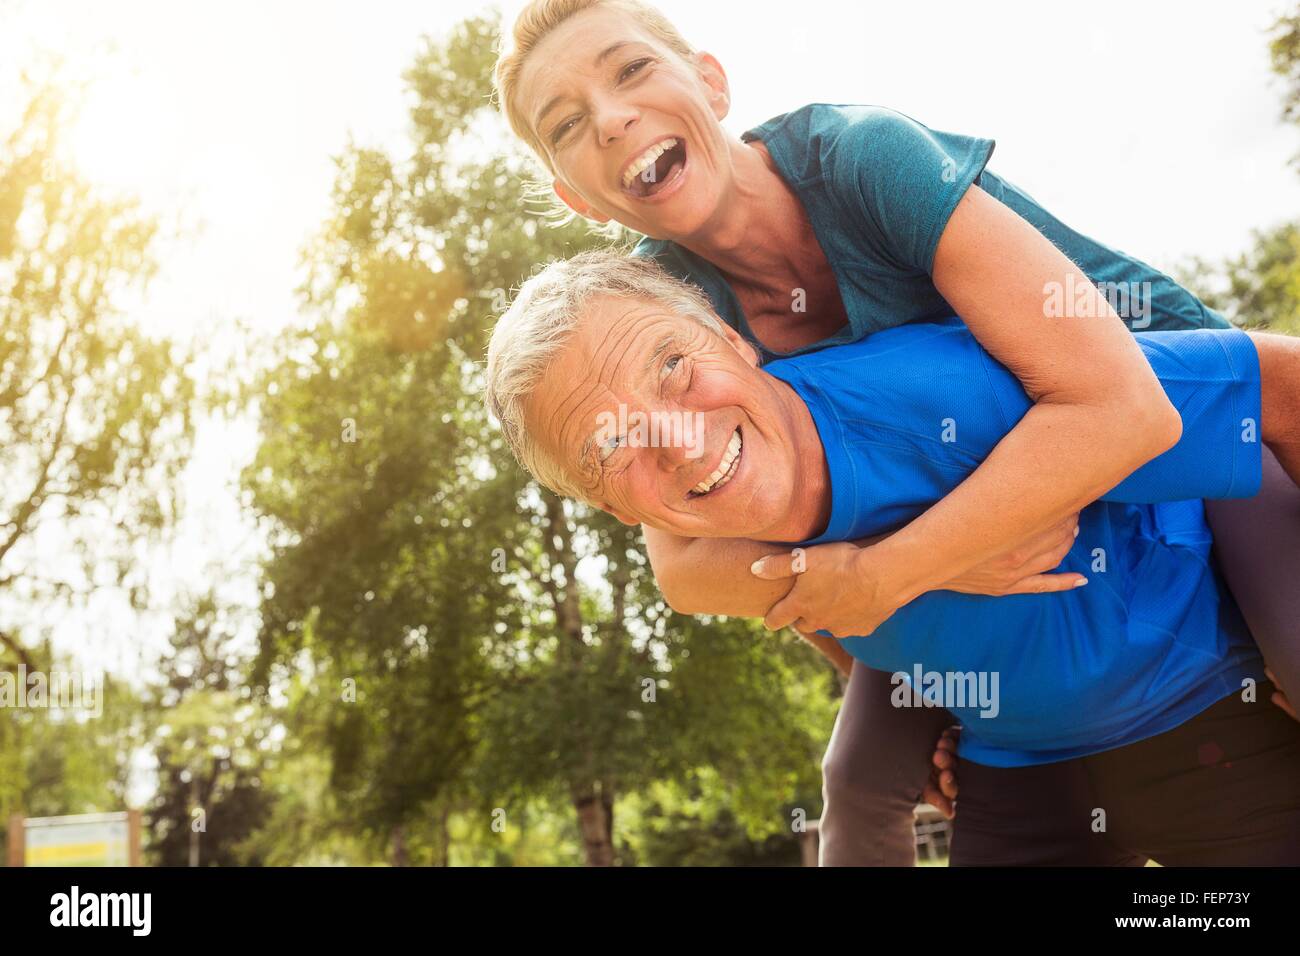 Senior man carrying mature woman on back, outdoors, laughing Stock Photo